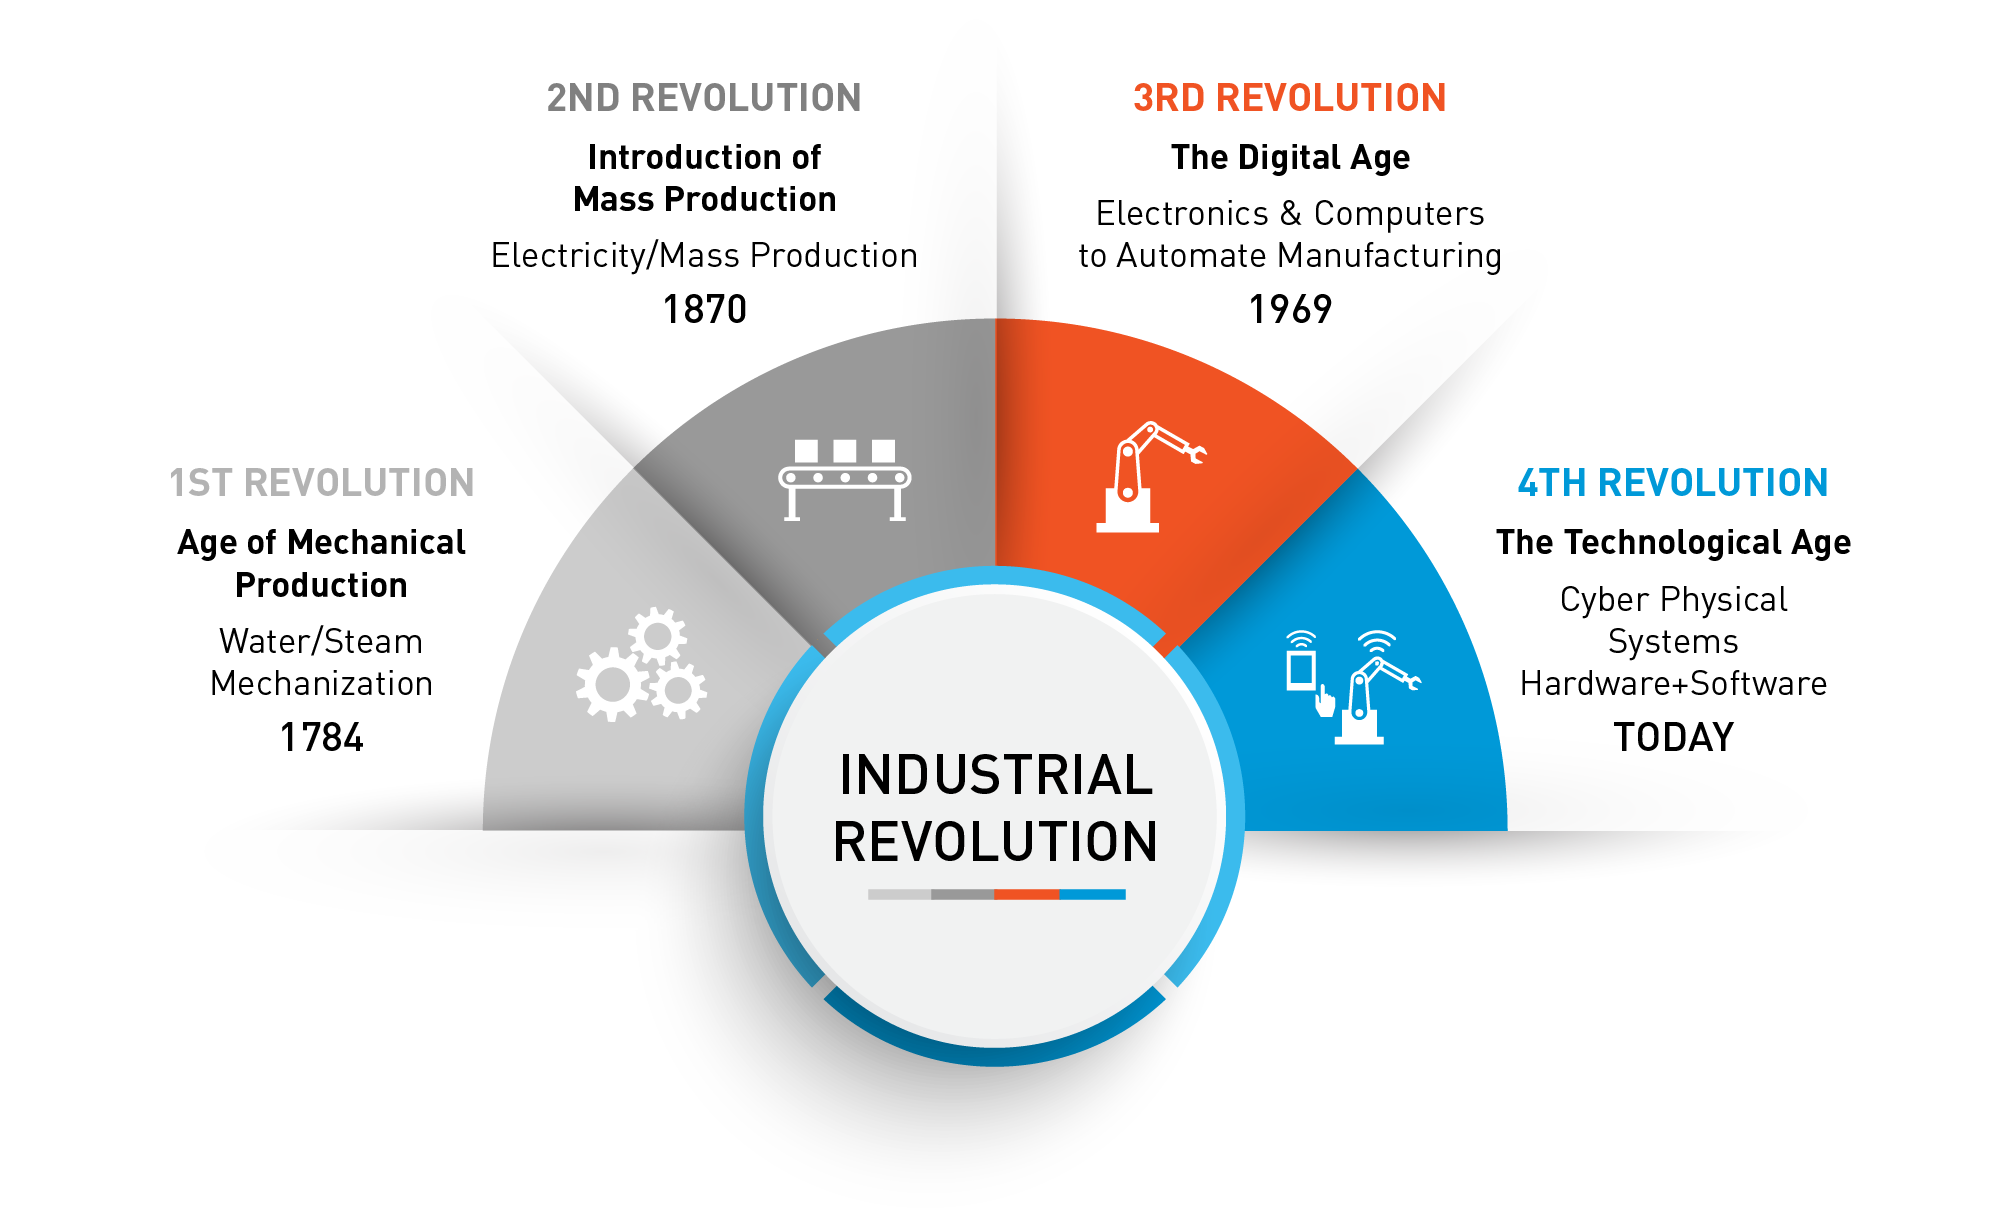 INDUSTRY 4.0 - Totally Automated Systems